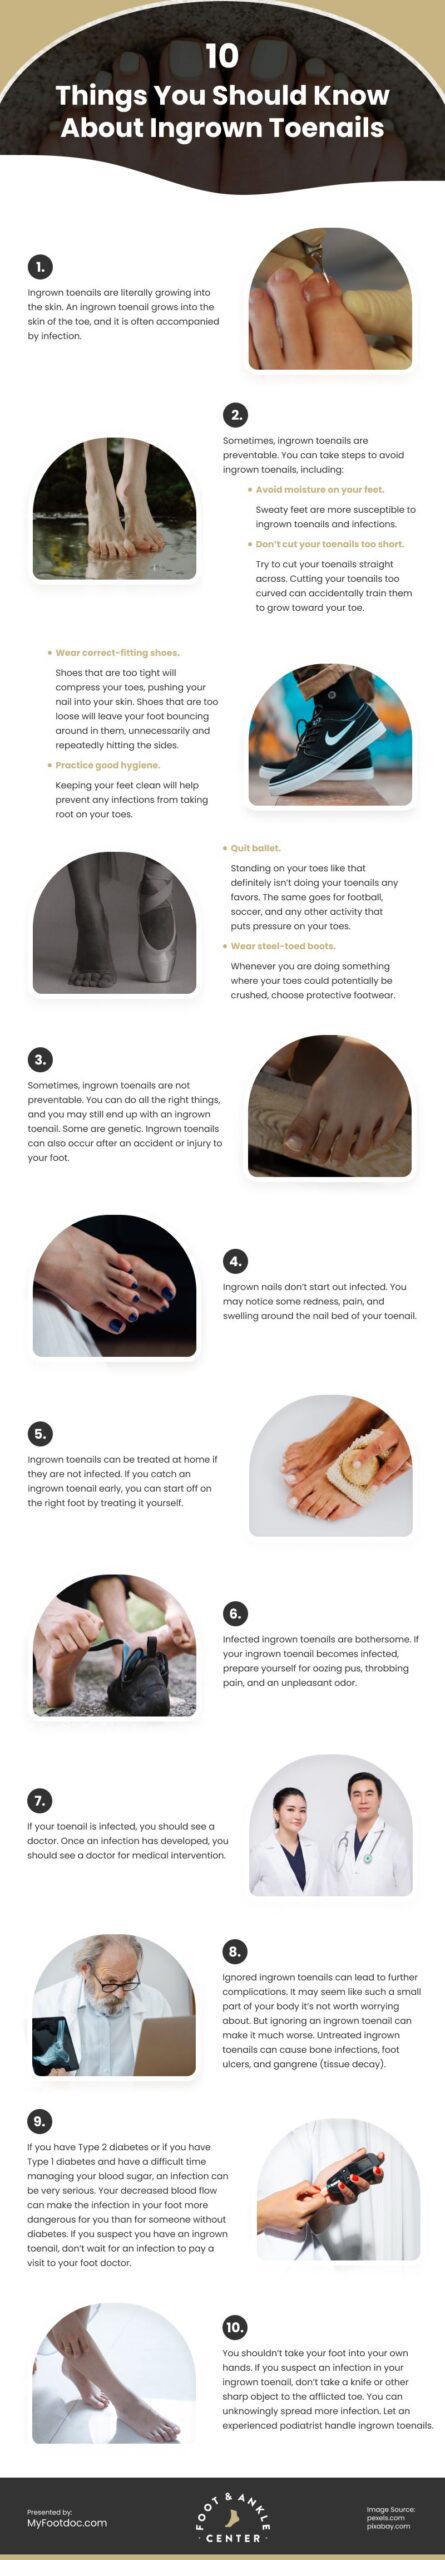 10 Things You Should Know About Ingrown Toenails Infographic